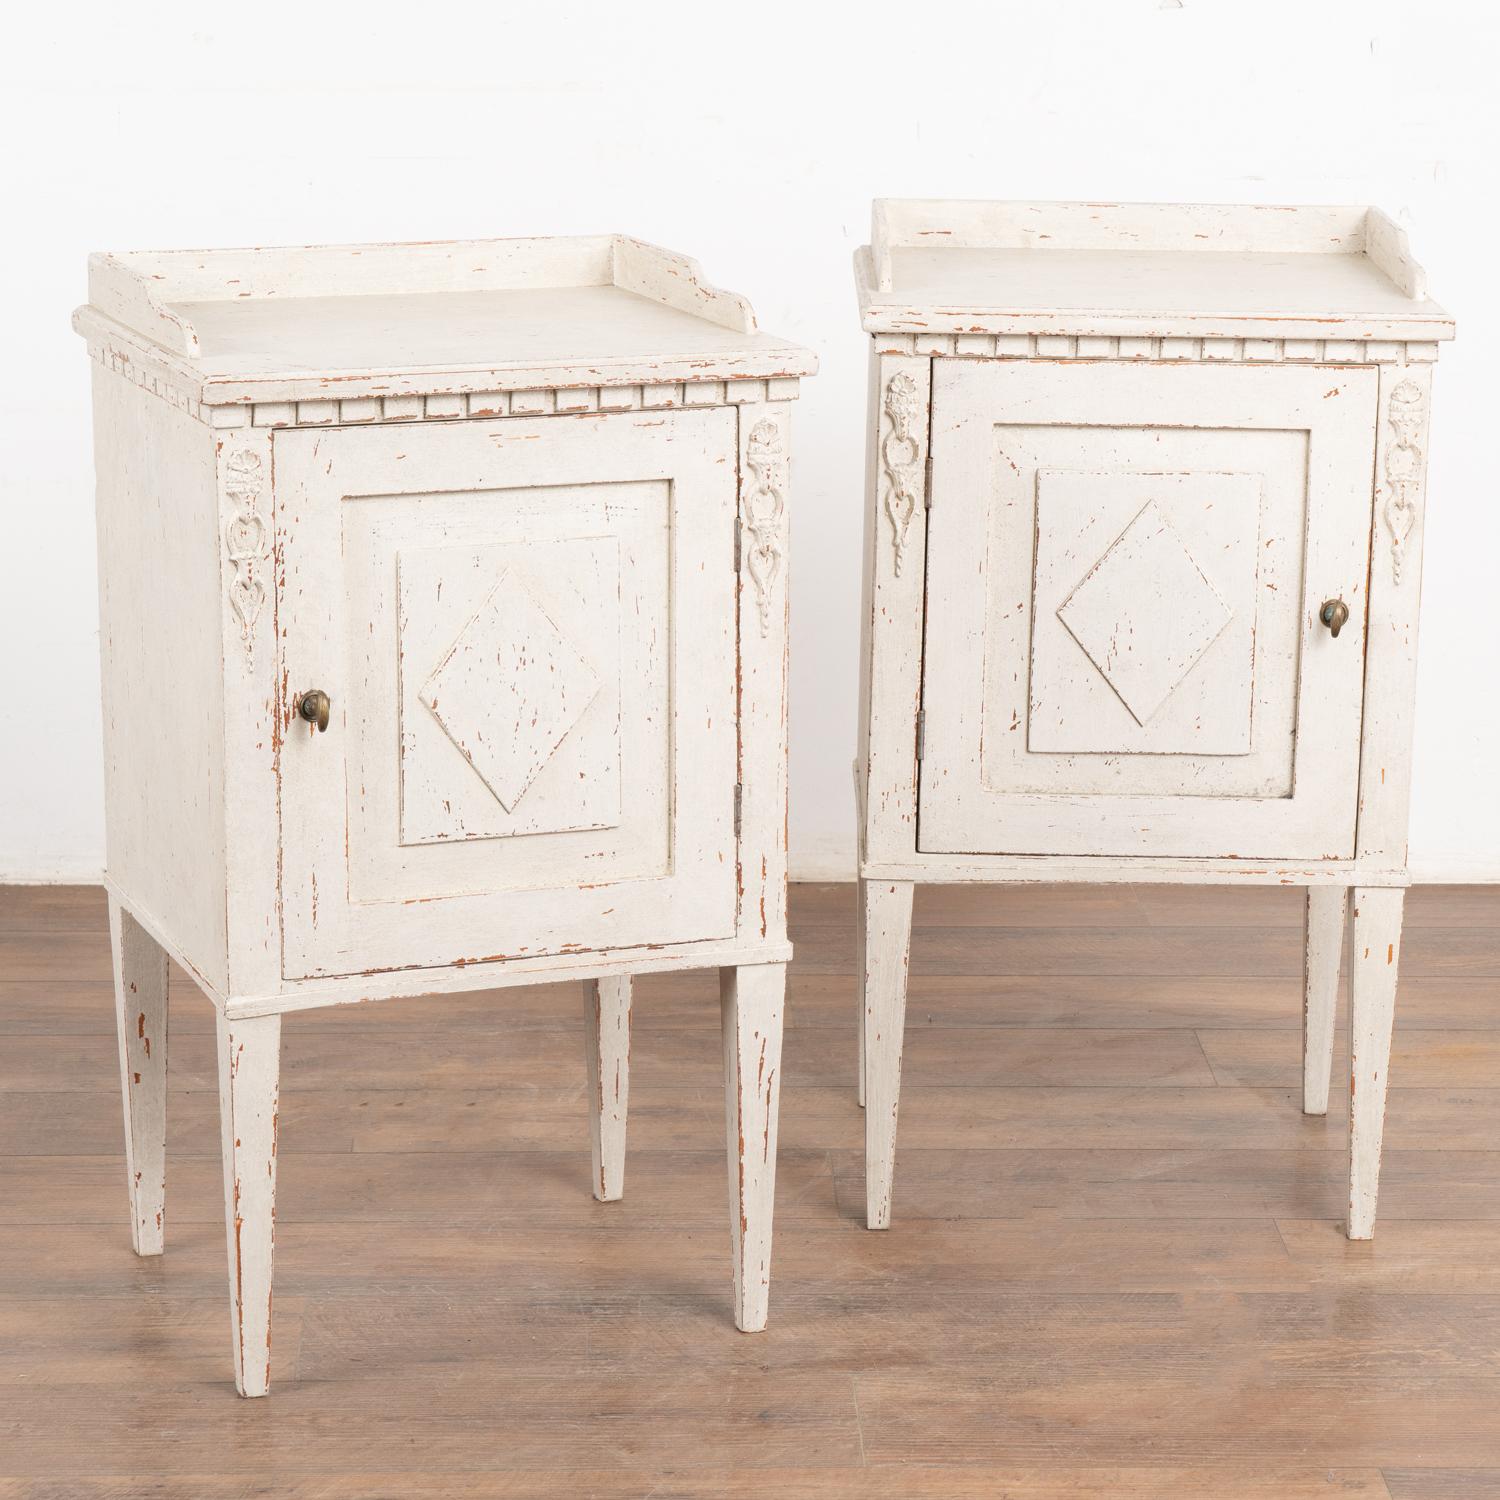 Pair, small Swedish Gustavian style white painted nightstands or side tables standing on tapered legs.
Applied floral carving accents the front along with dentil molding and diamond on panel door which opens by turning brass knob.
Professionally